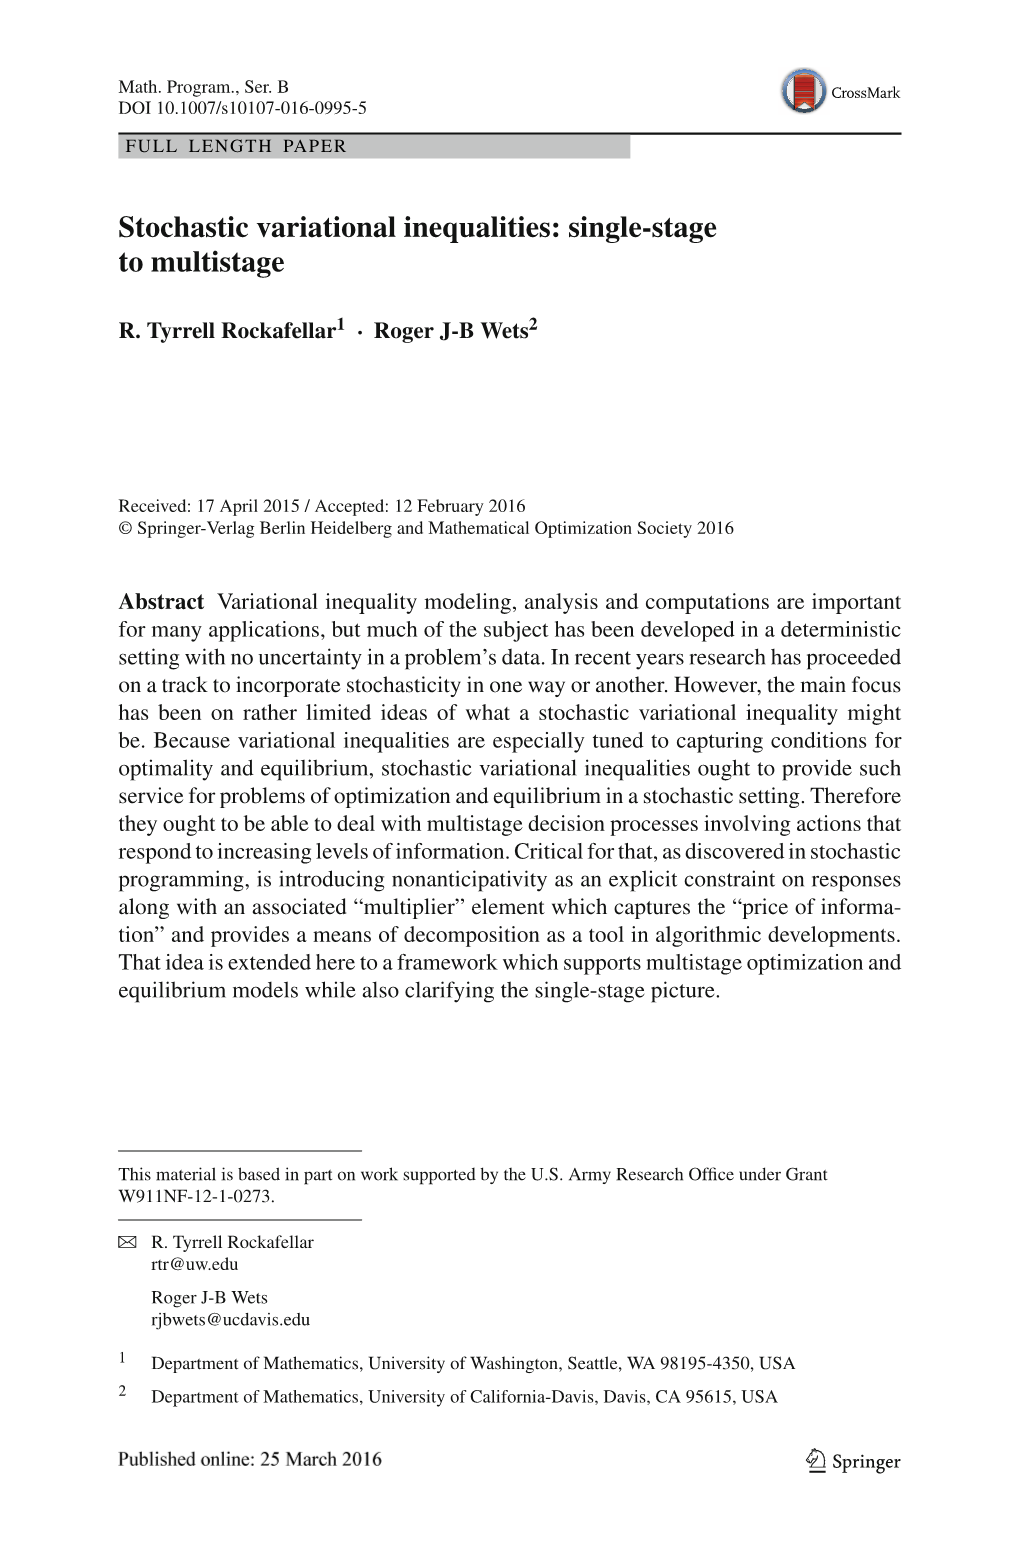 Stochastic Variational Inequalities: Single-Stage to Multistage